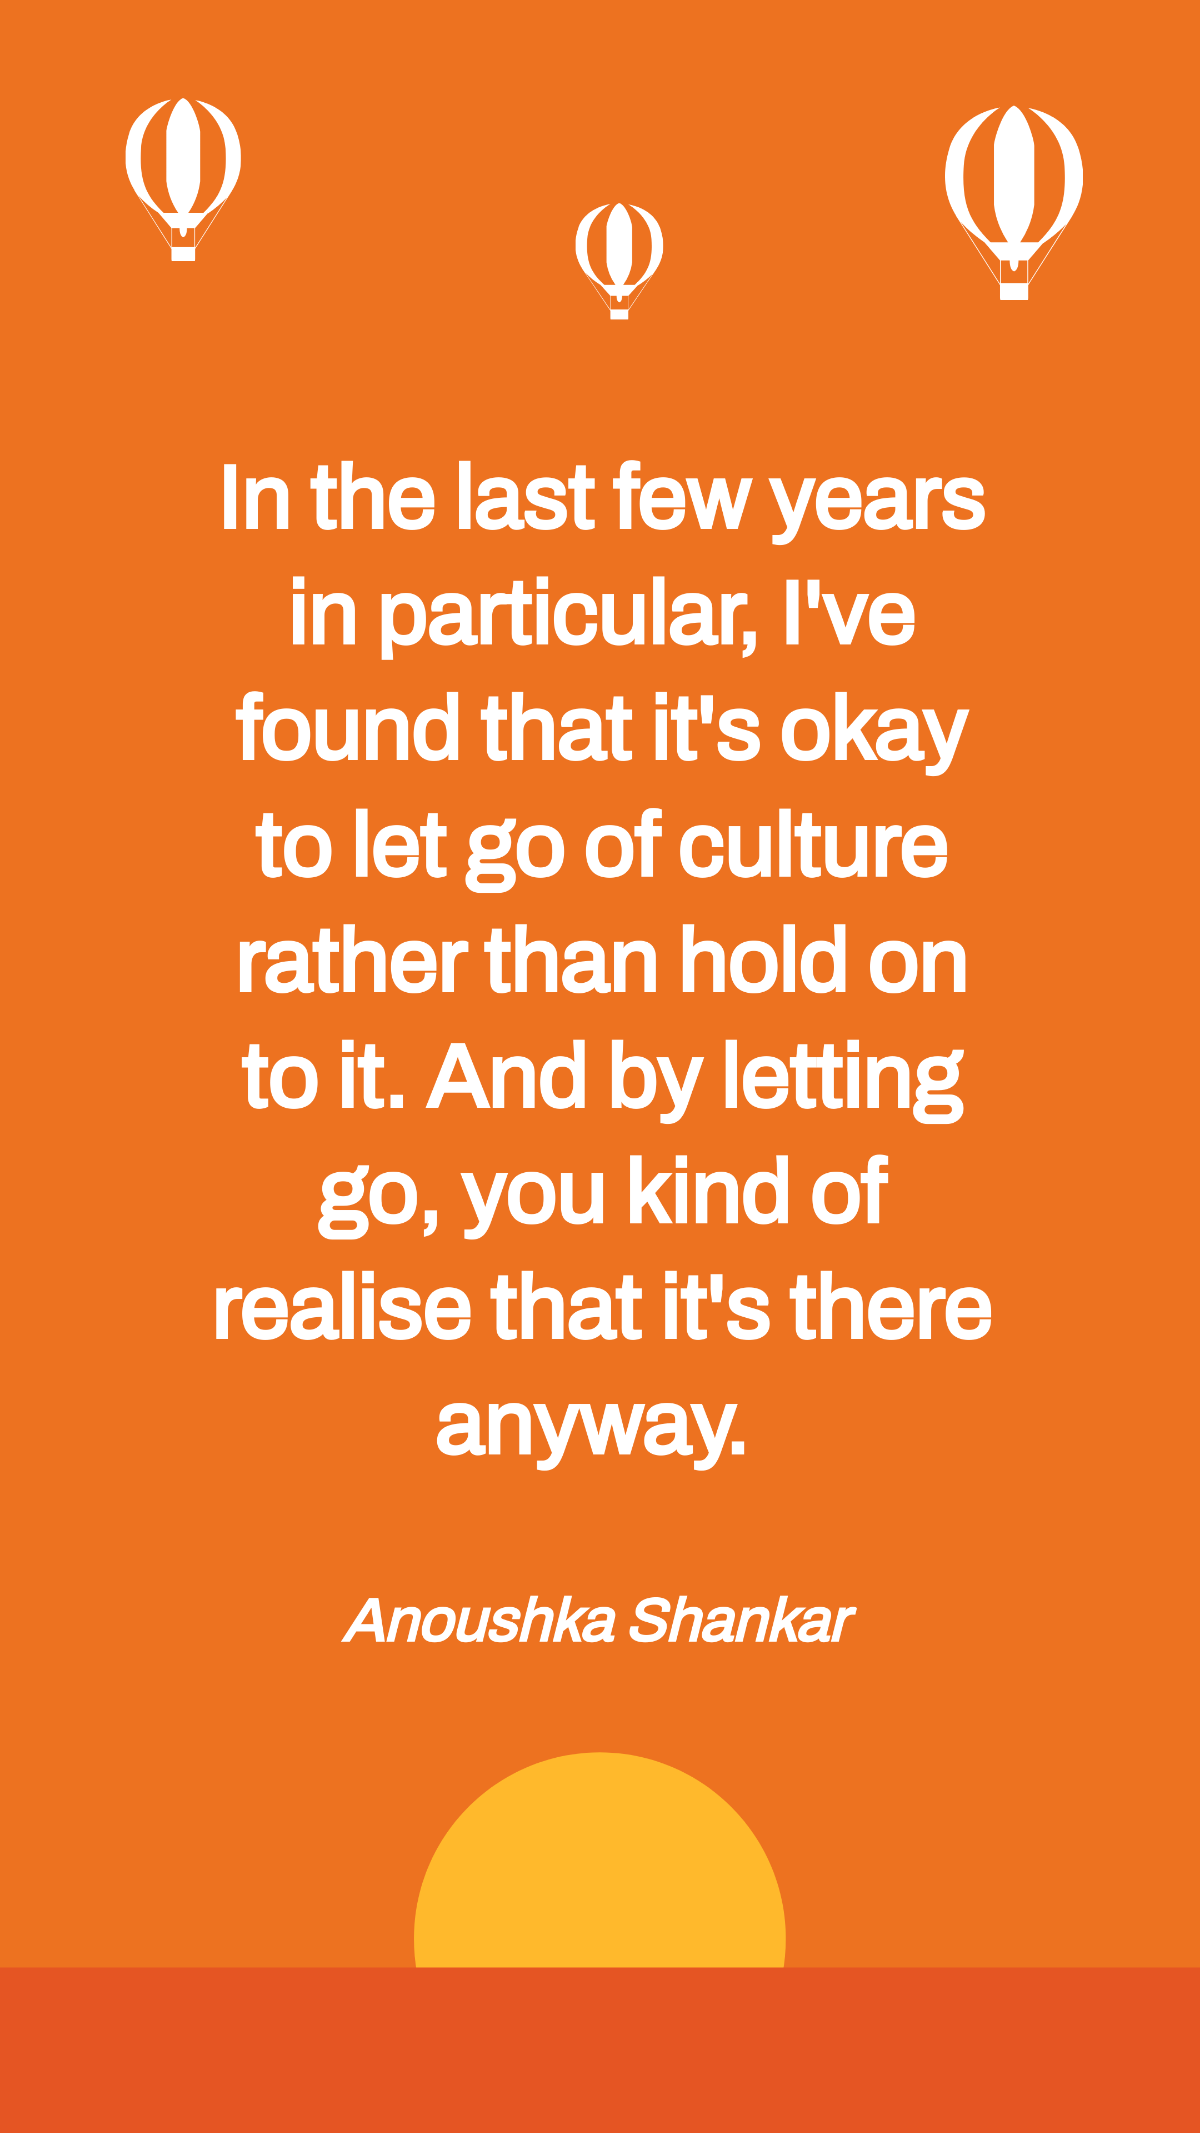 Anoushka Shankar - In the last few years in particular, I've found that it's okay to let go of culture rather than hold on to it. And by letting go, you kind of realise that it's there anyway.  Templa